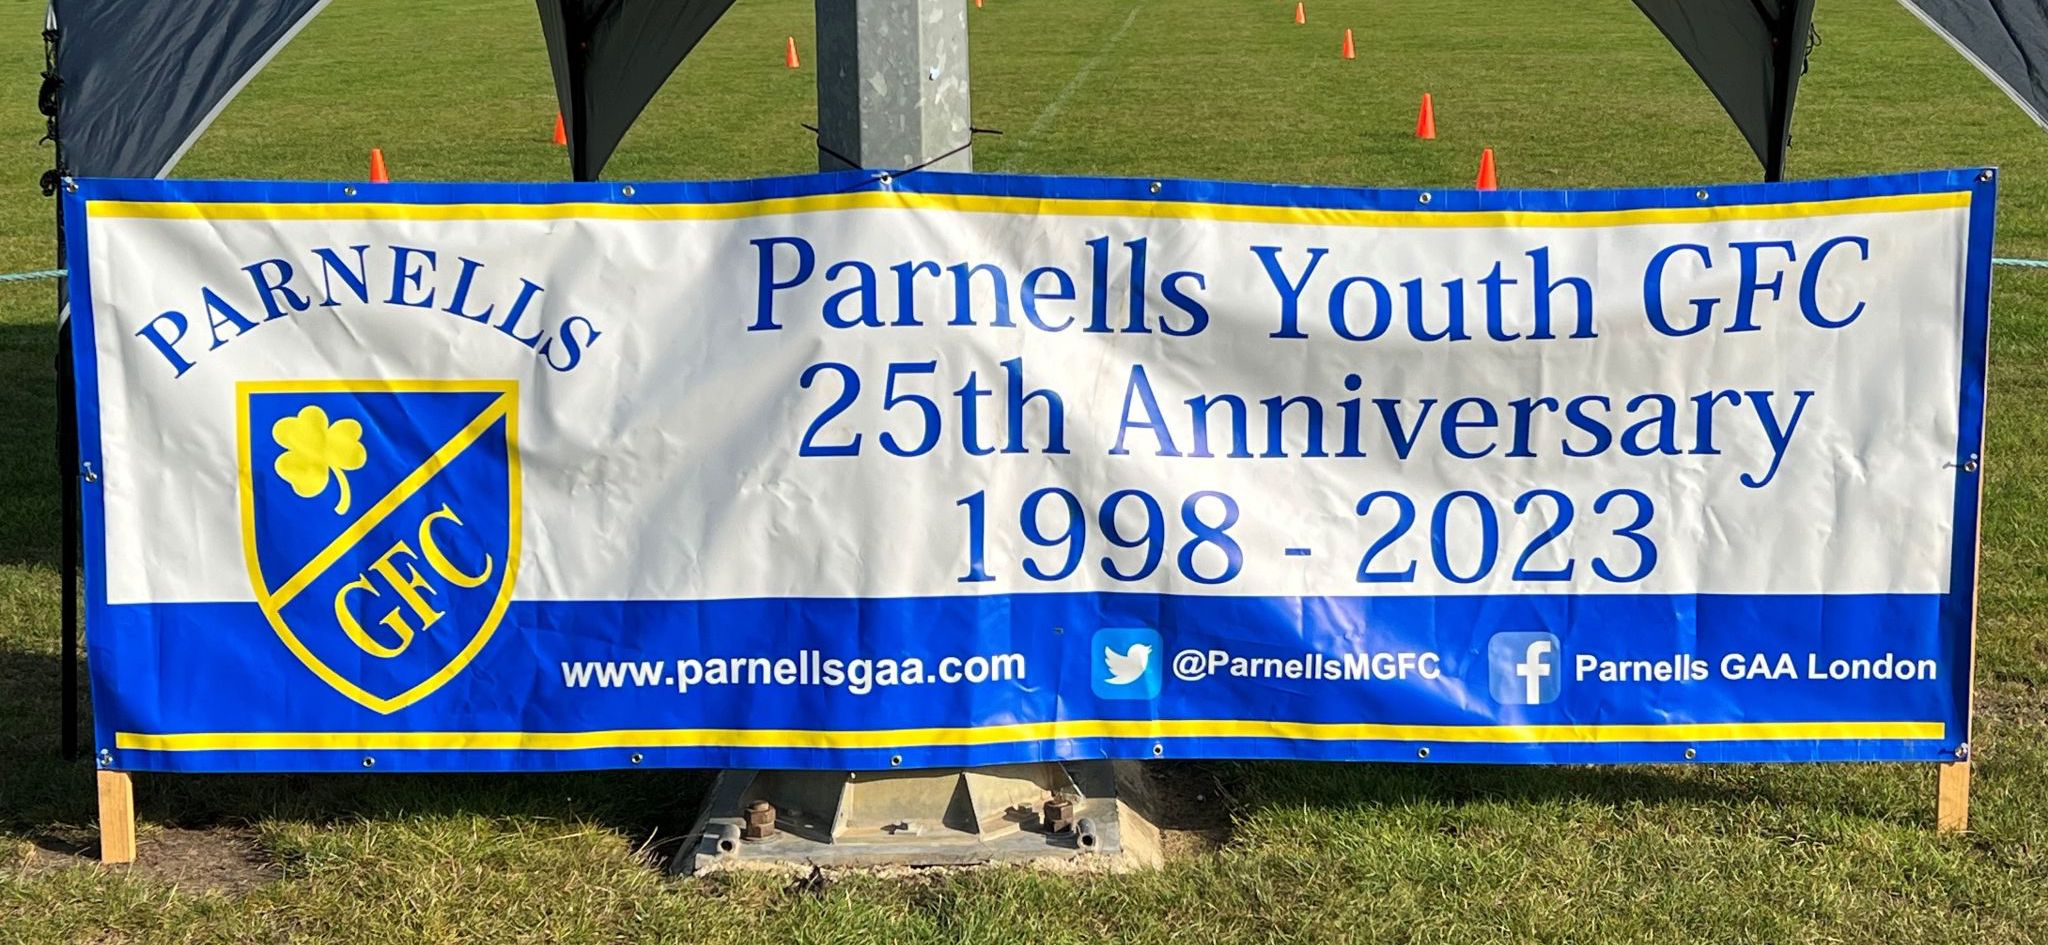 Parnells Youth GFC club poster at a football field